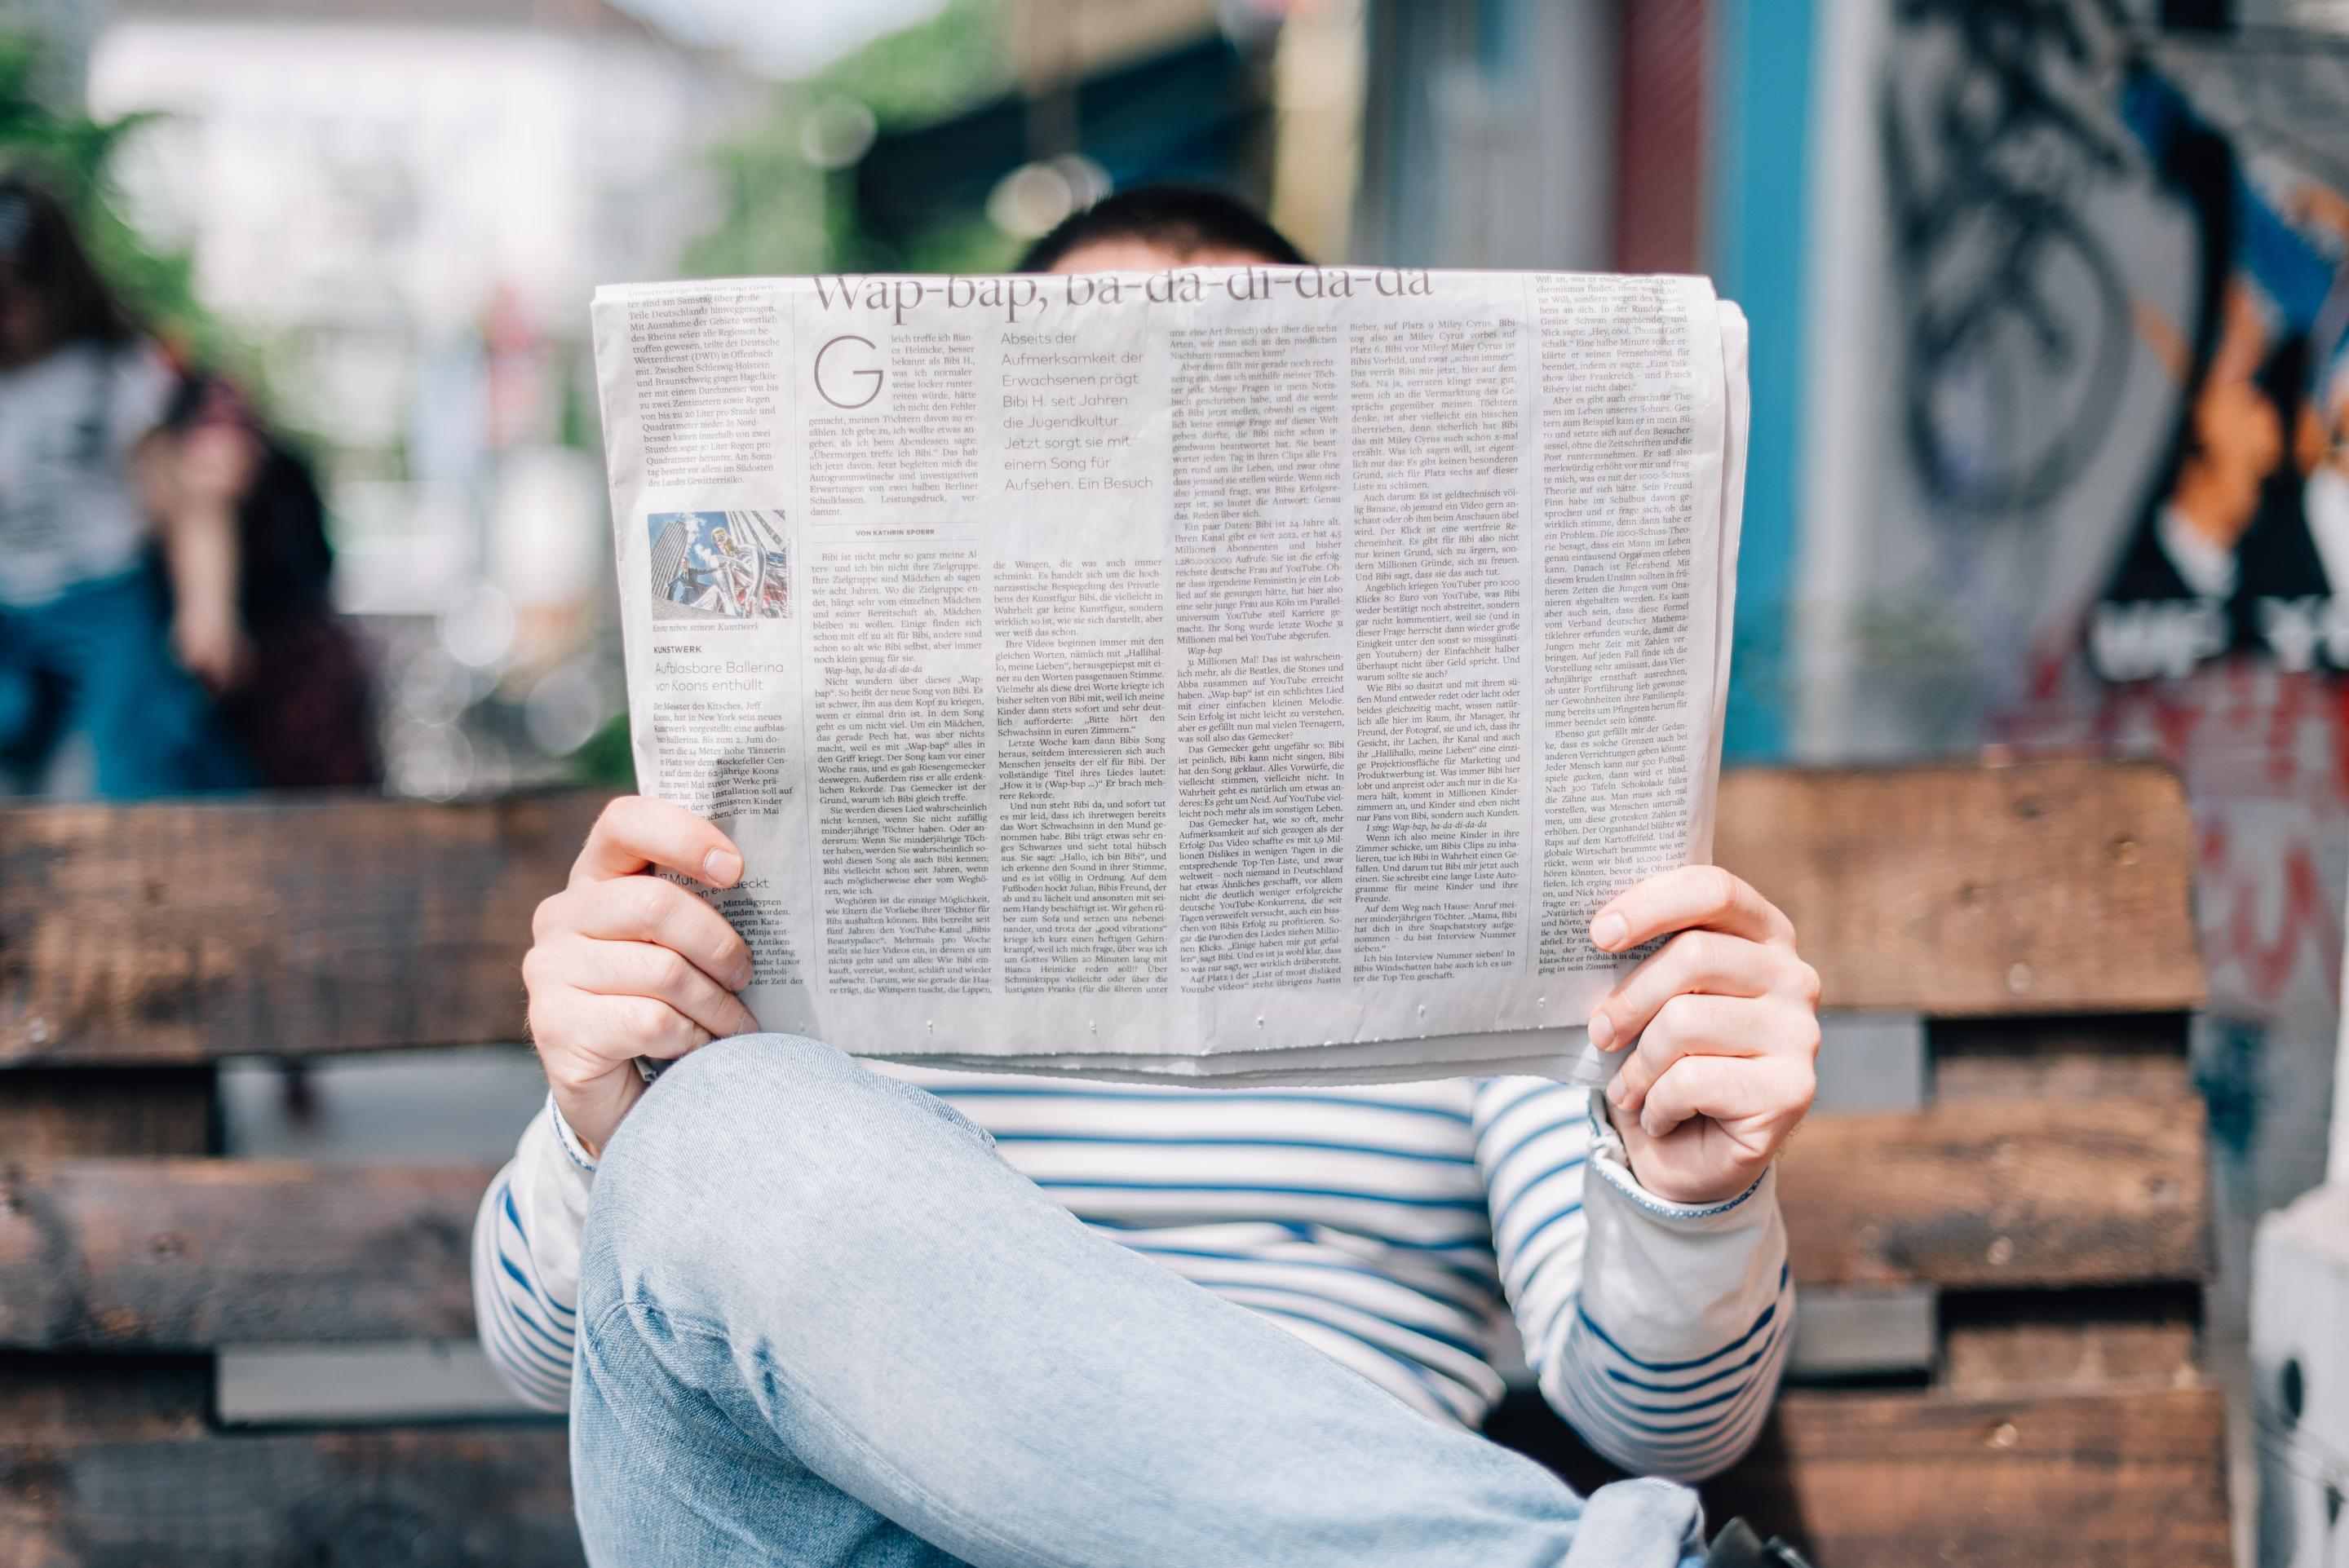 The photo shows a person sitting on a bench reading a newspaper. Their face is cover by the newspaper.